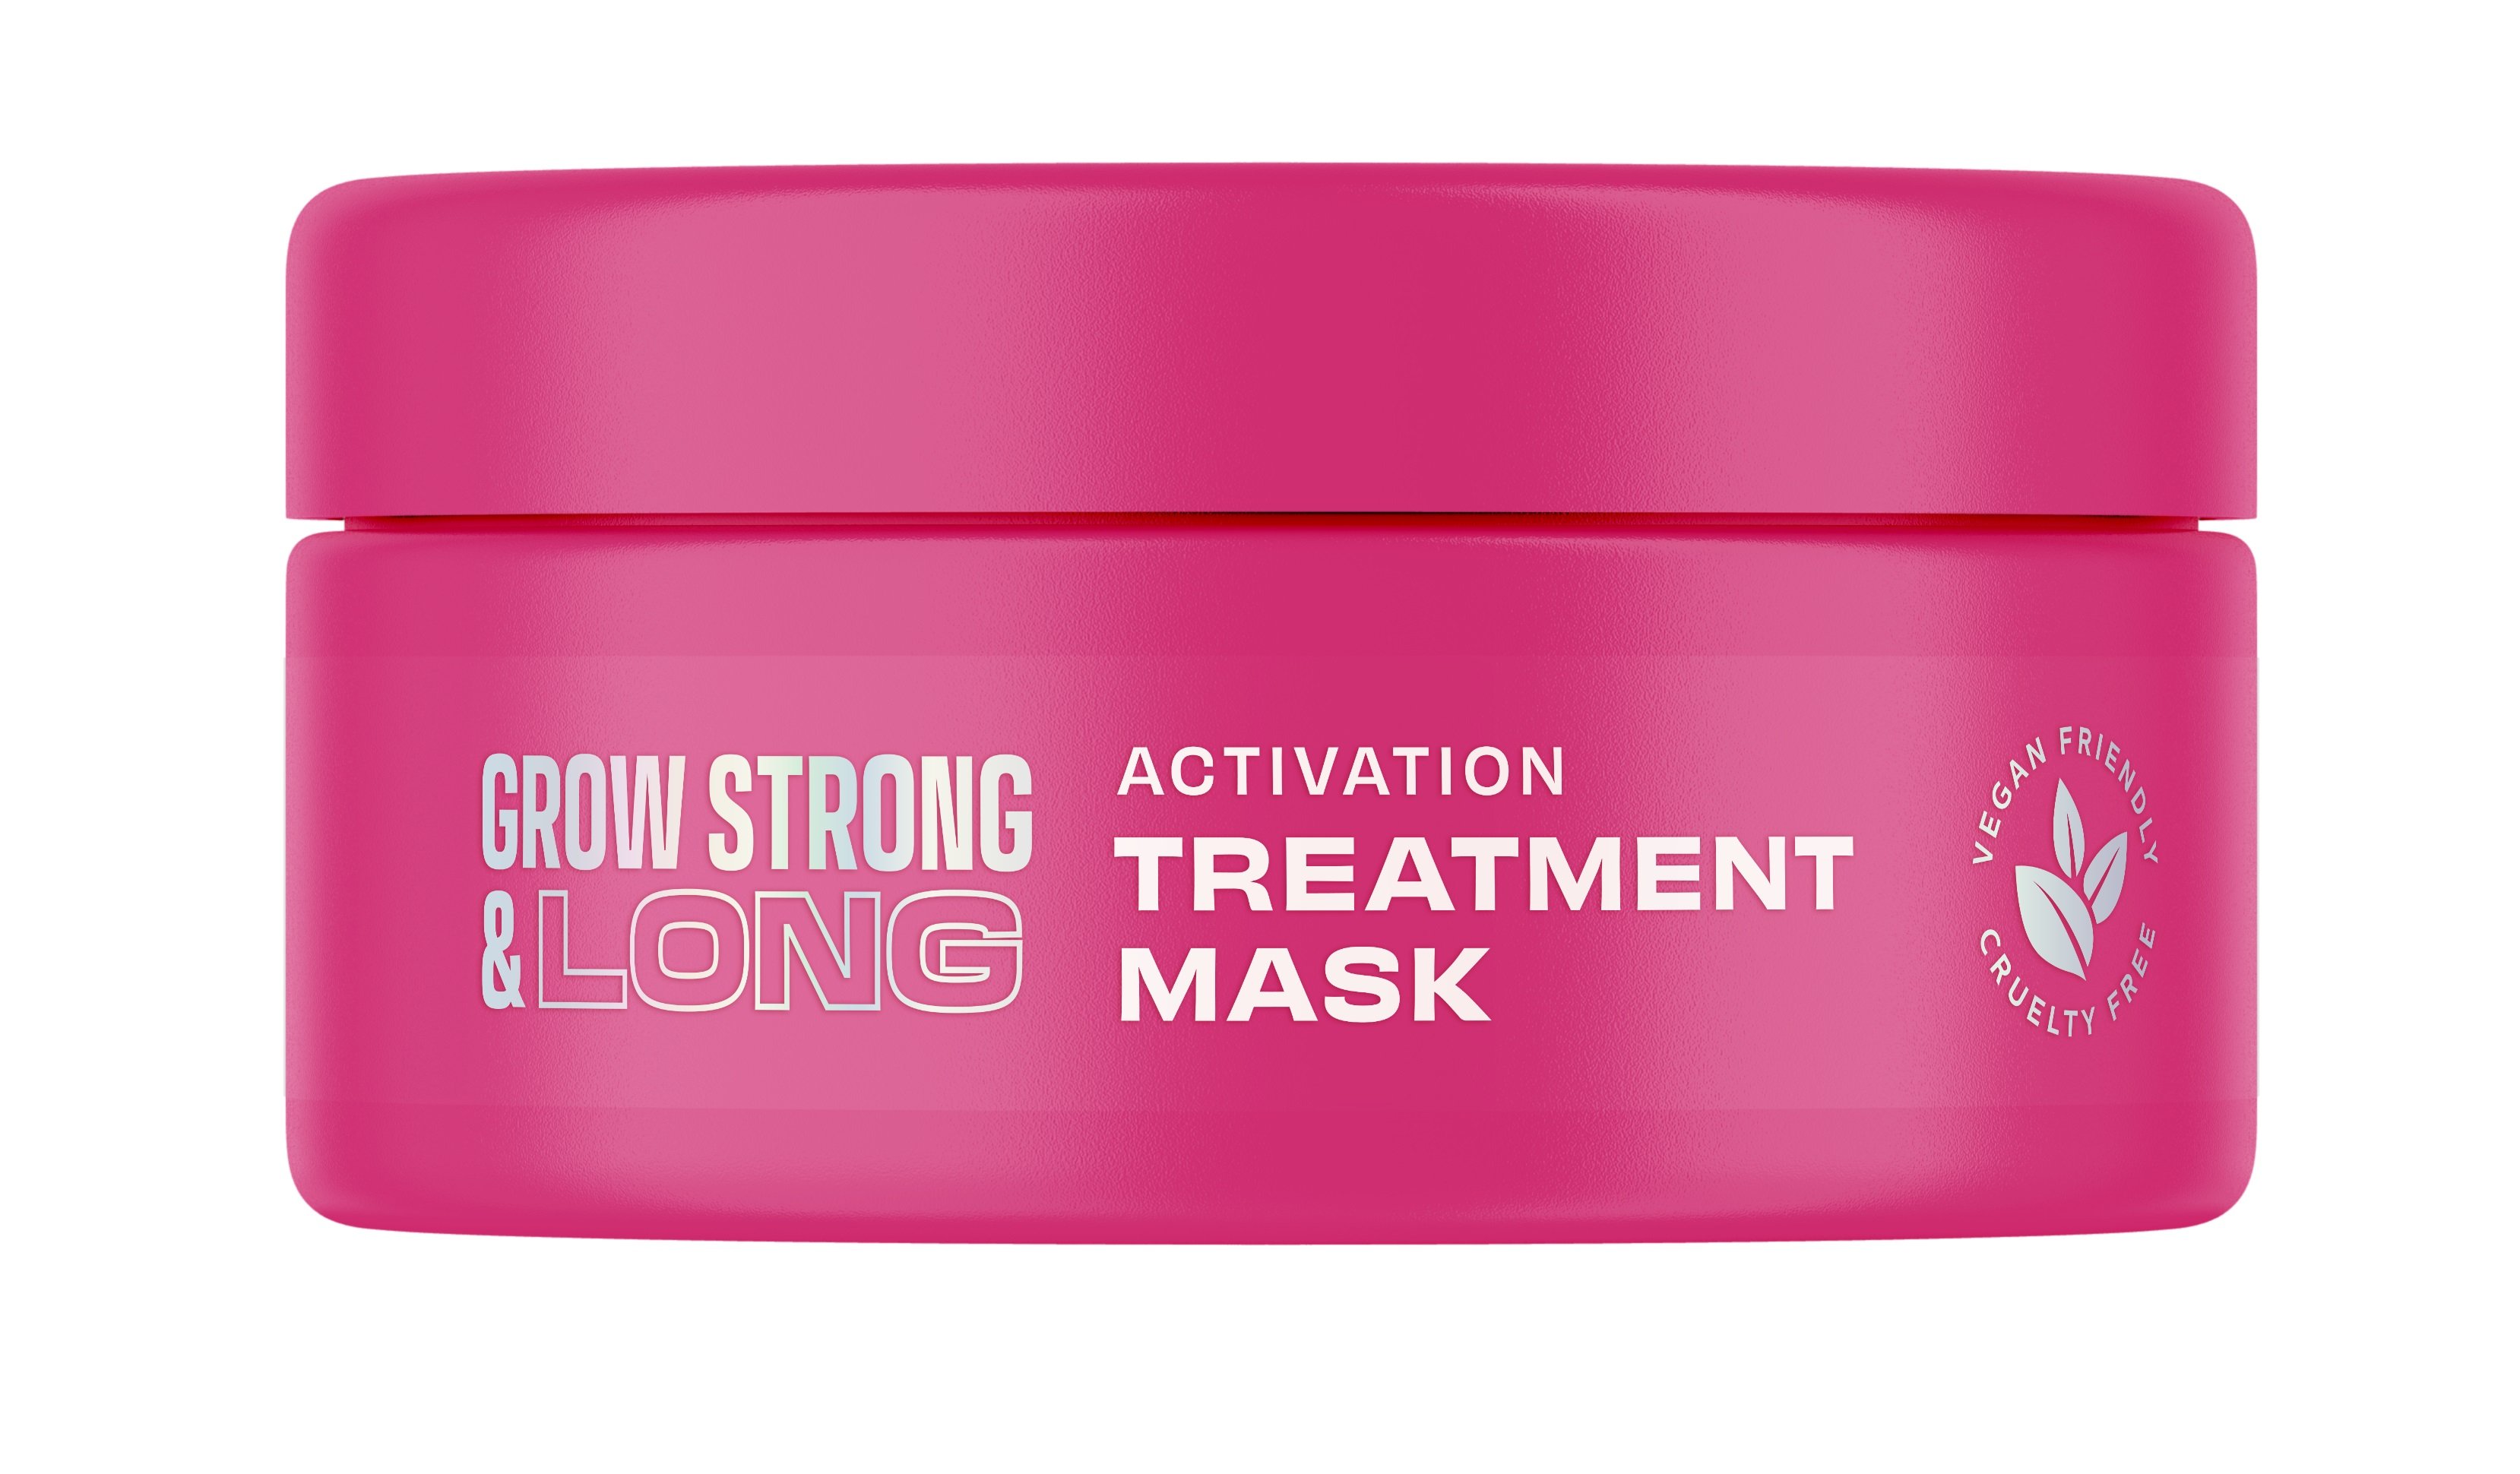 Lee Stafford - Grow Strong&Long Activation Treatment Mask 200 ml